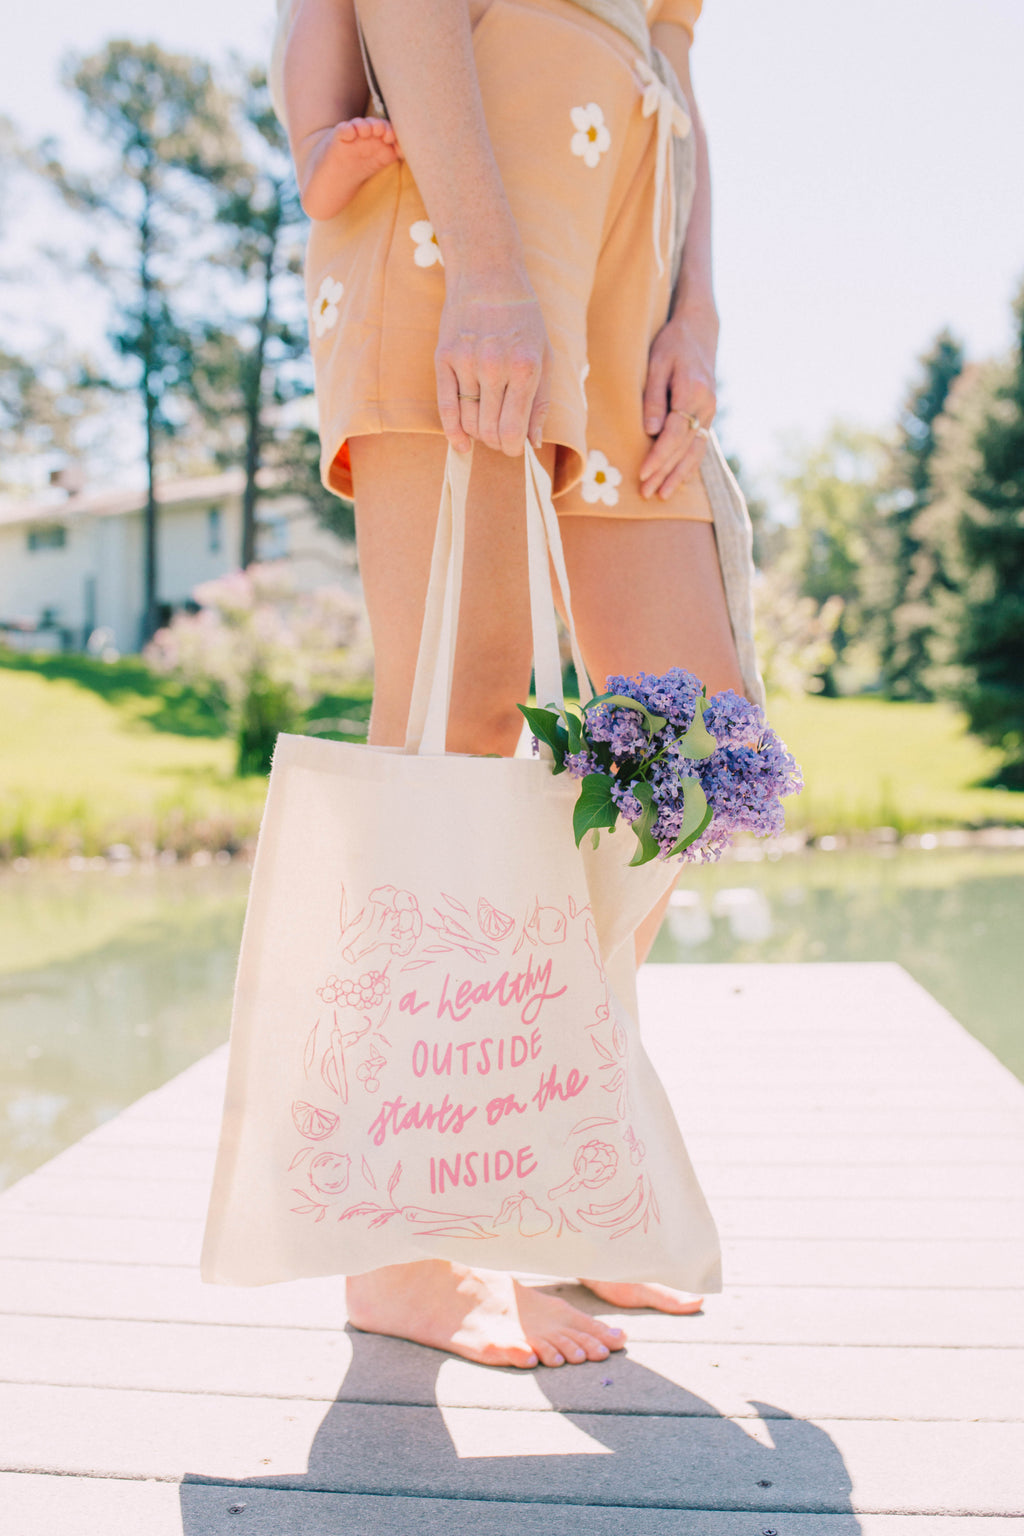 "A healthy outside starts on the inside" Canvas Tote Bag